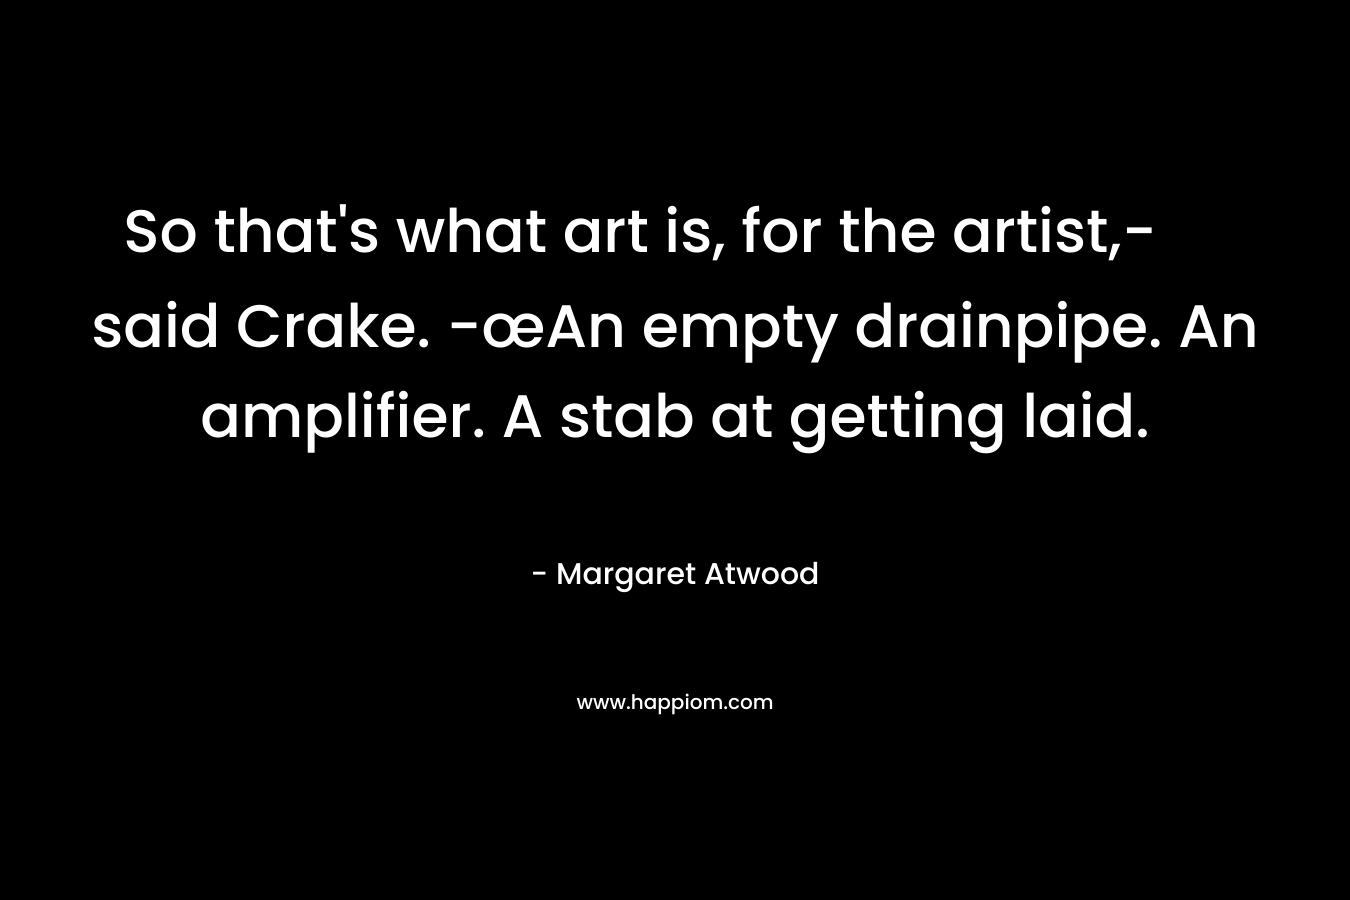 So that’s what art is, for the artist,- said Crake. -œAn empty drainpipe. An amplifier. A stab at getting laid. – Margaret Atwood